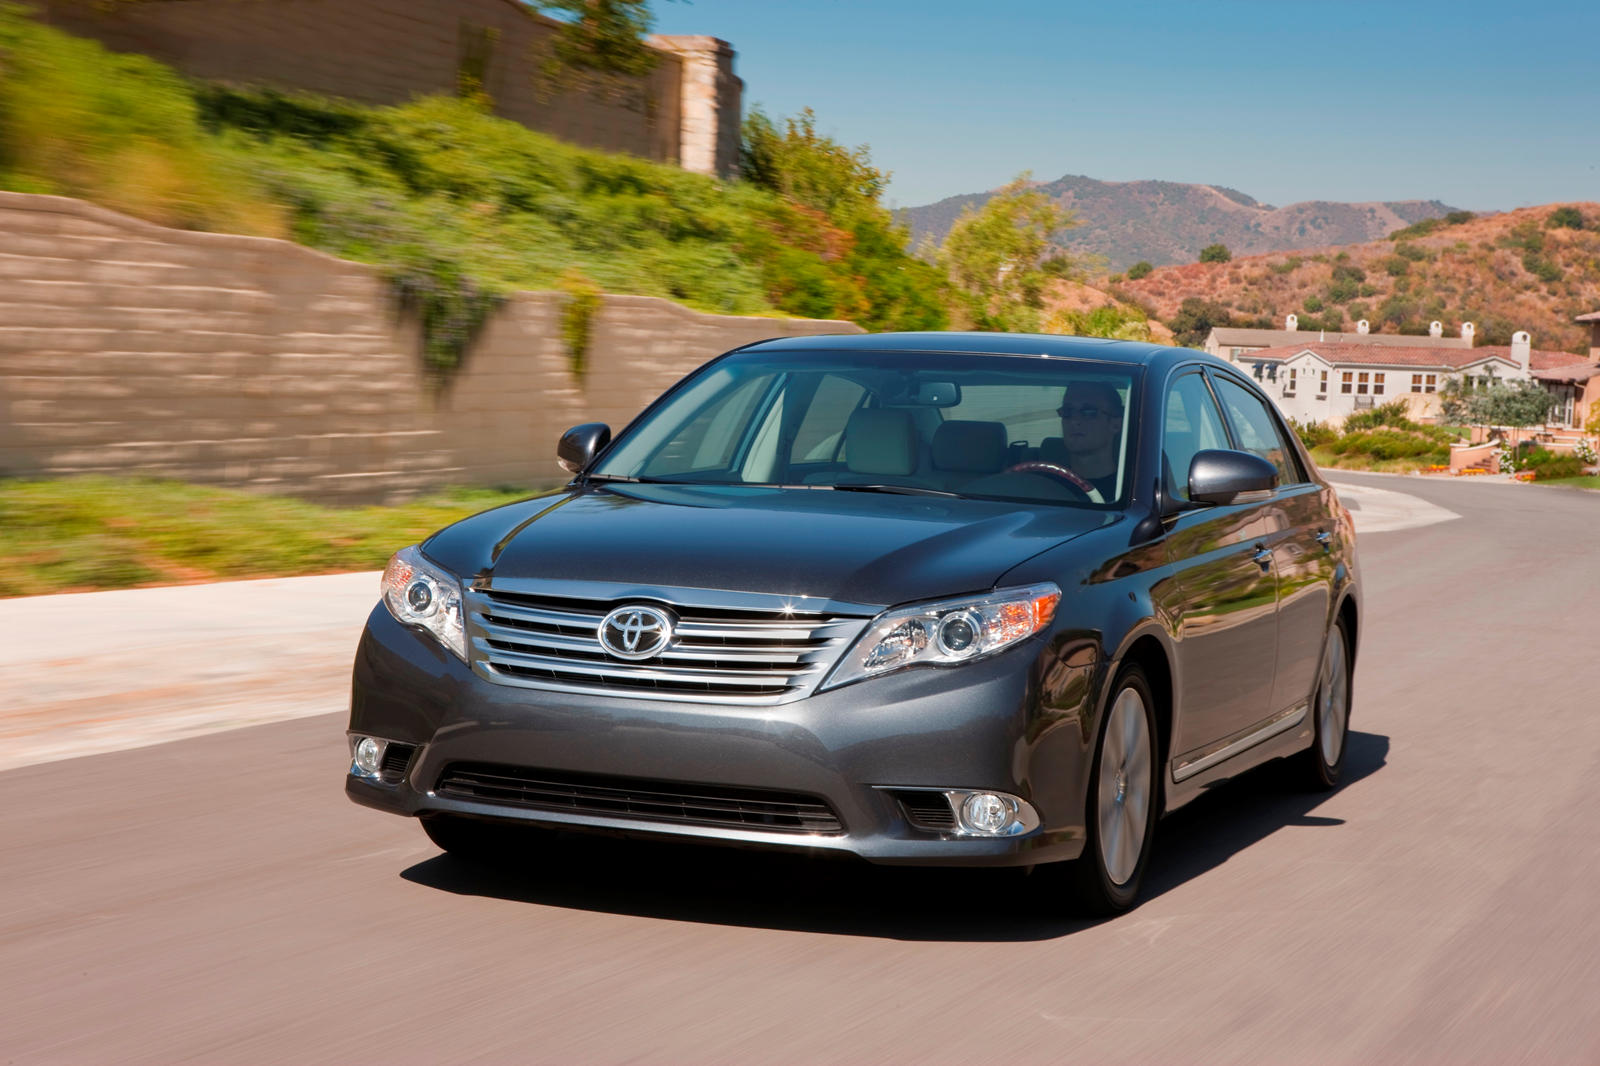 2011 Toyota Avalon Three Quarter Front Left Side View In Motion